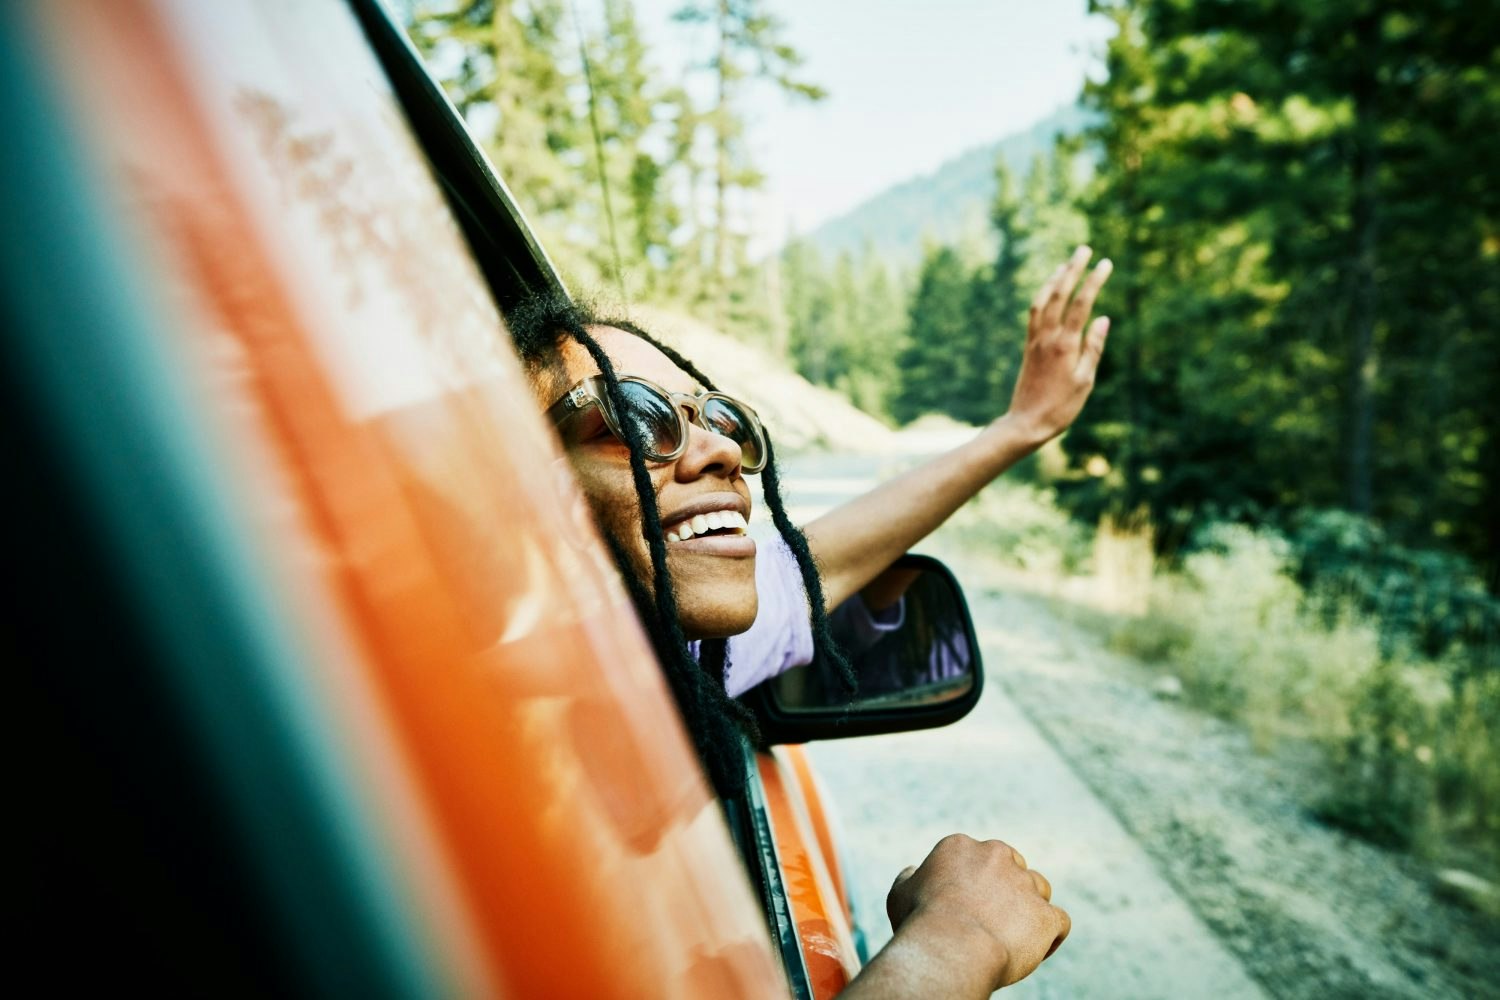 Smiling woman with head and hand out of car window enjoying view of mountains